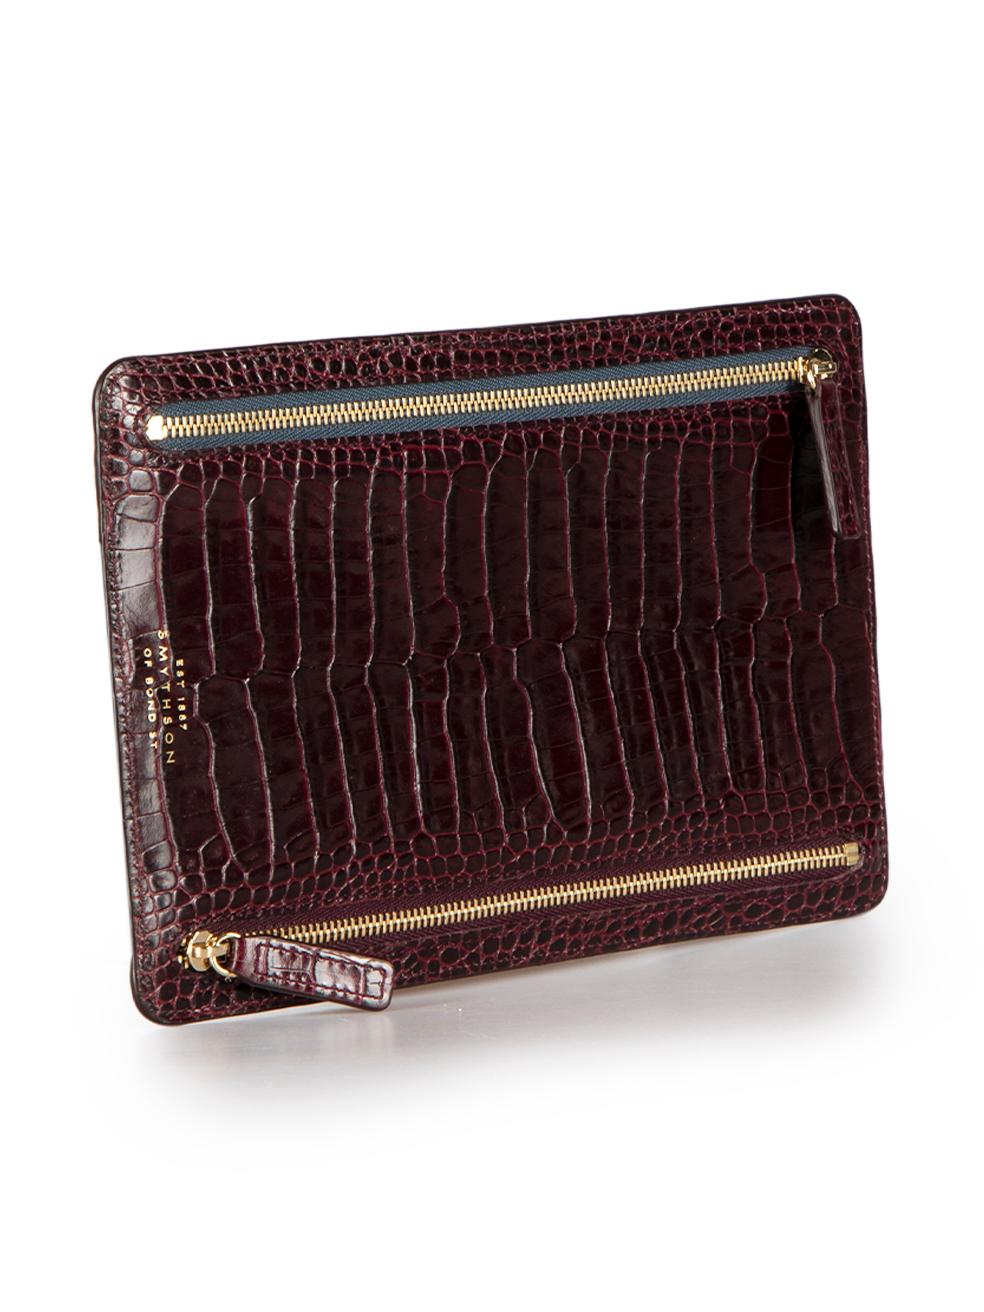 CONDITION is Very good. Hardly any visible wear to pouch is evident on this used Smythson designer resale item.

Details
Burgundy
Leather
Pouch
Aligator embossed pattern
4x Zipped pockets
 
Composition
EXTERIOR: Leather
INTERIOR: Cloth textile

Size